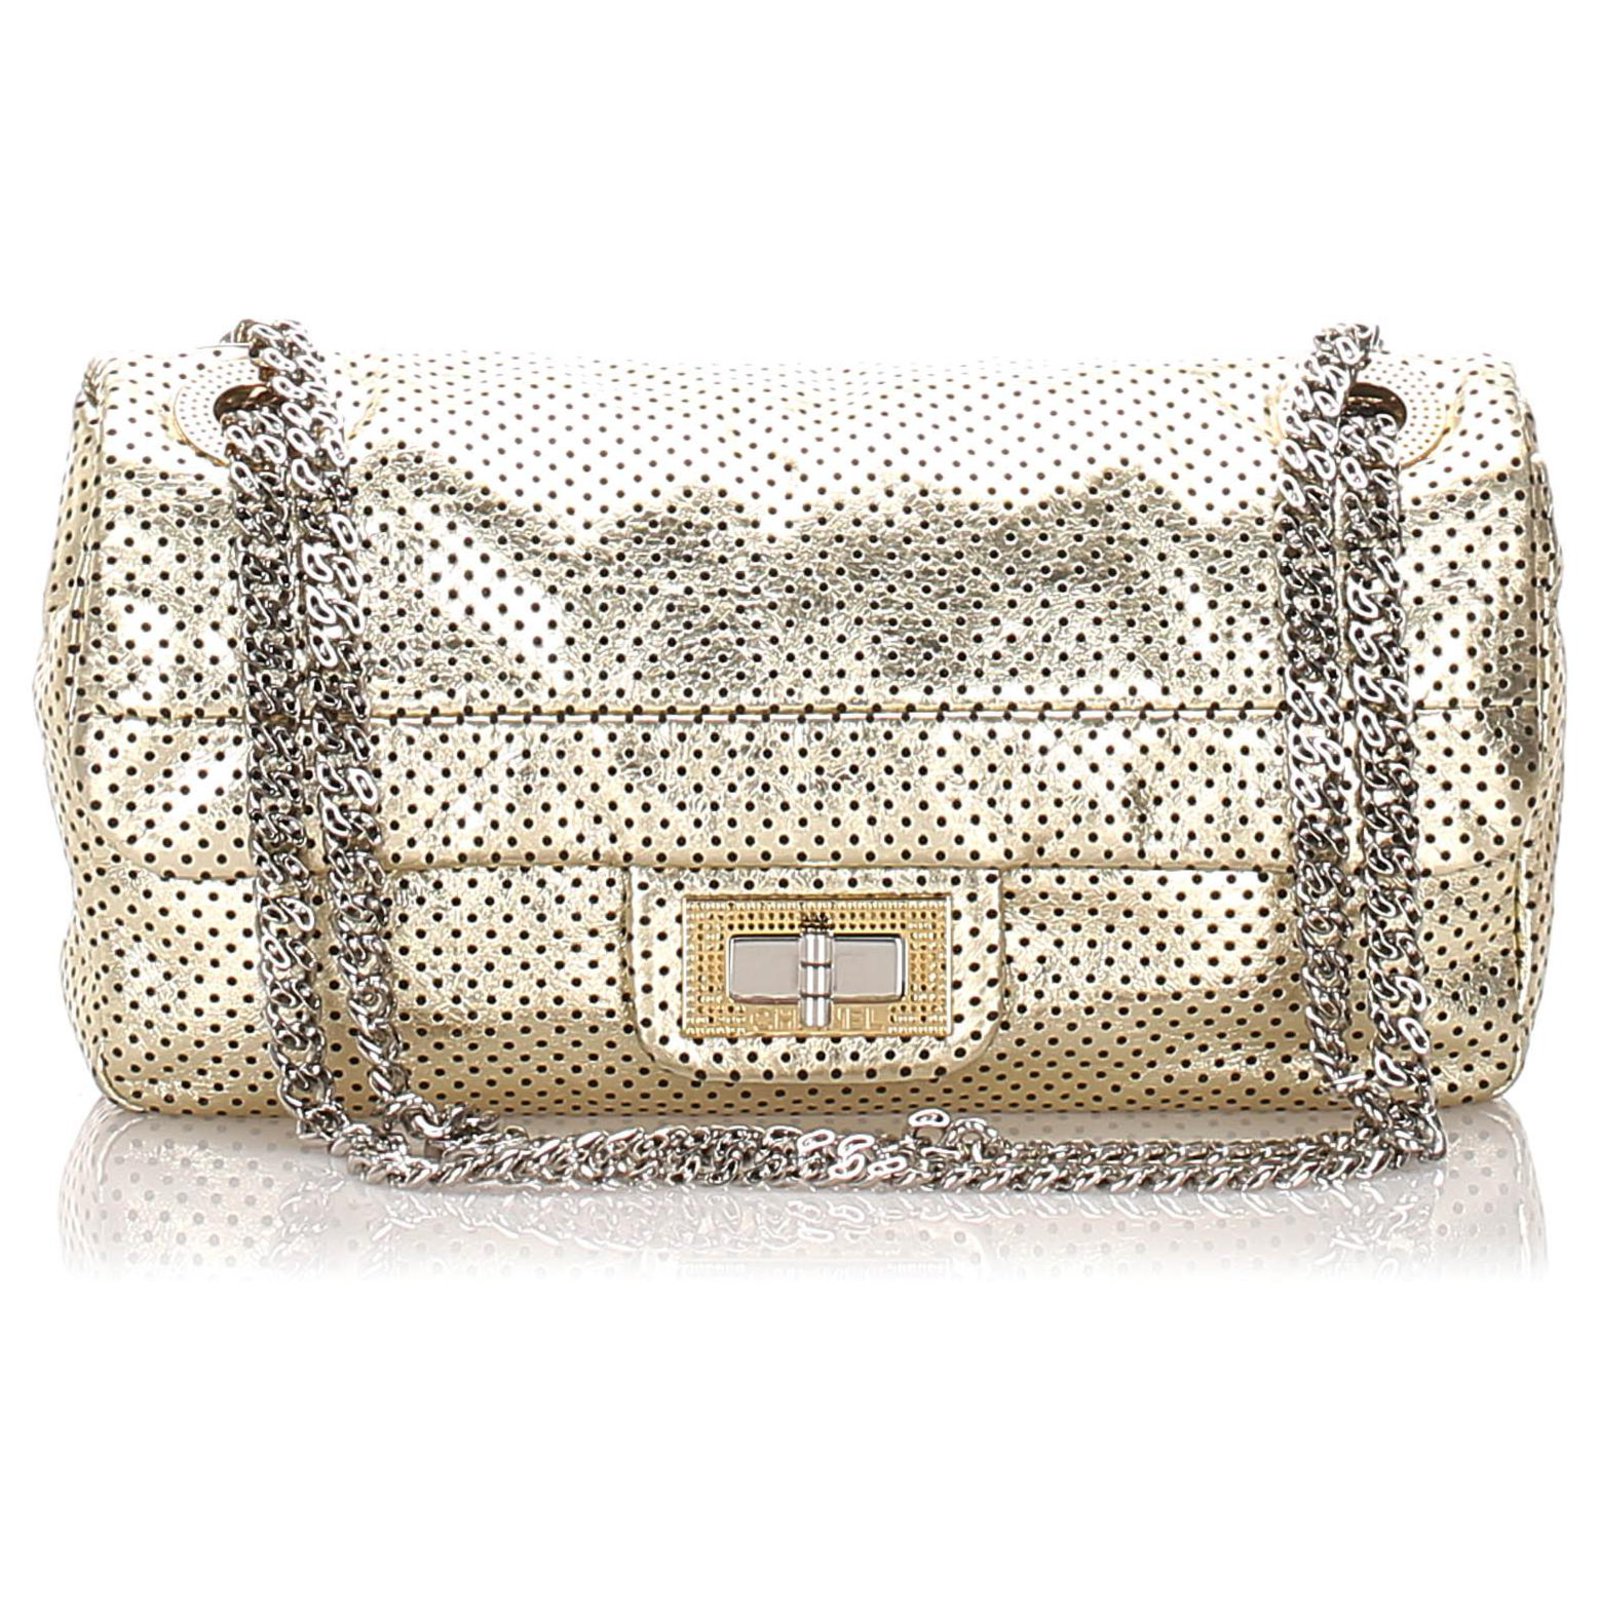 Chanel Gold Perforated Drill Leather Flap Bag Golden Pony-style ...